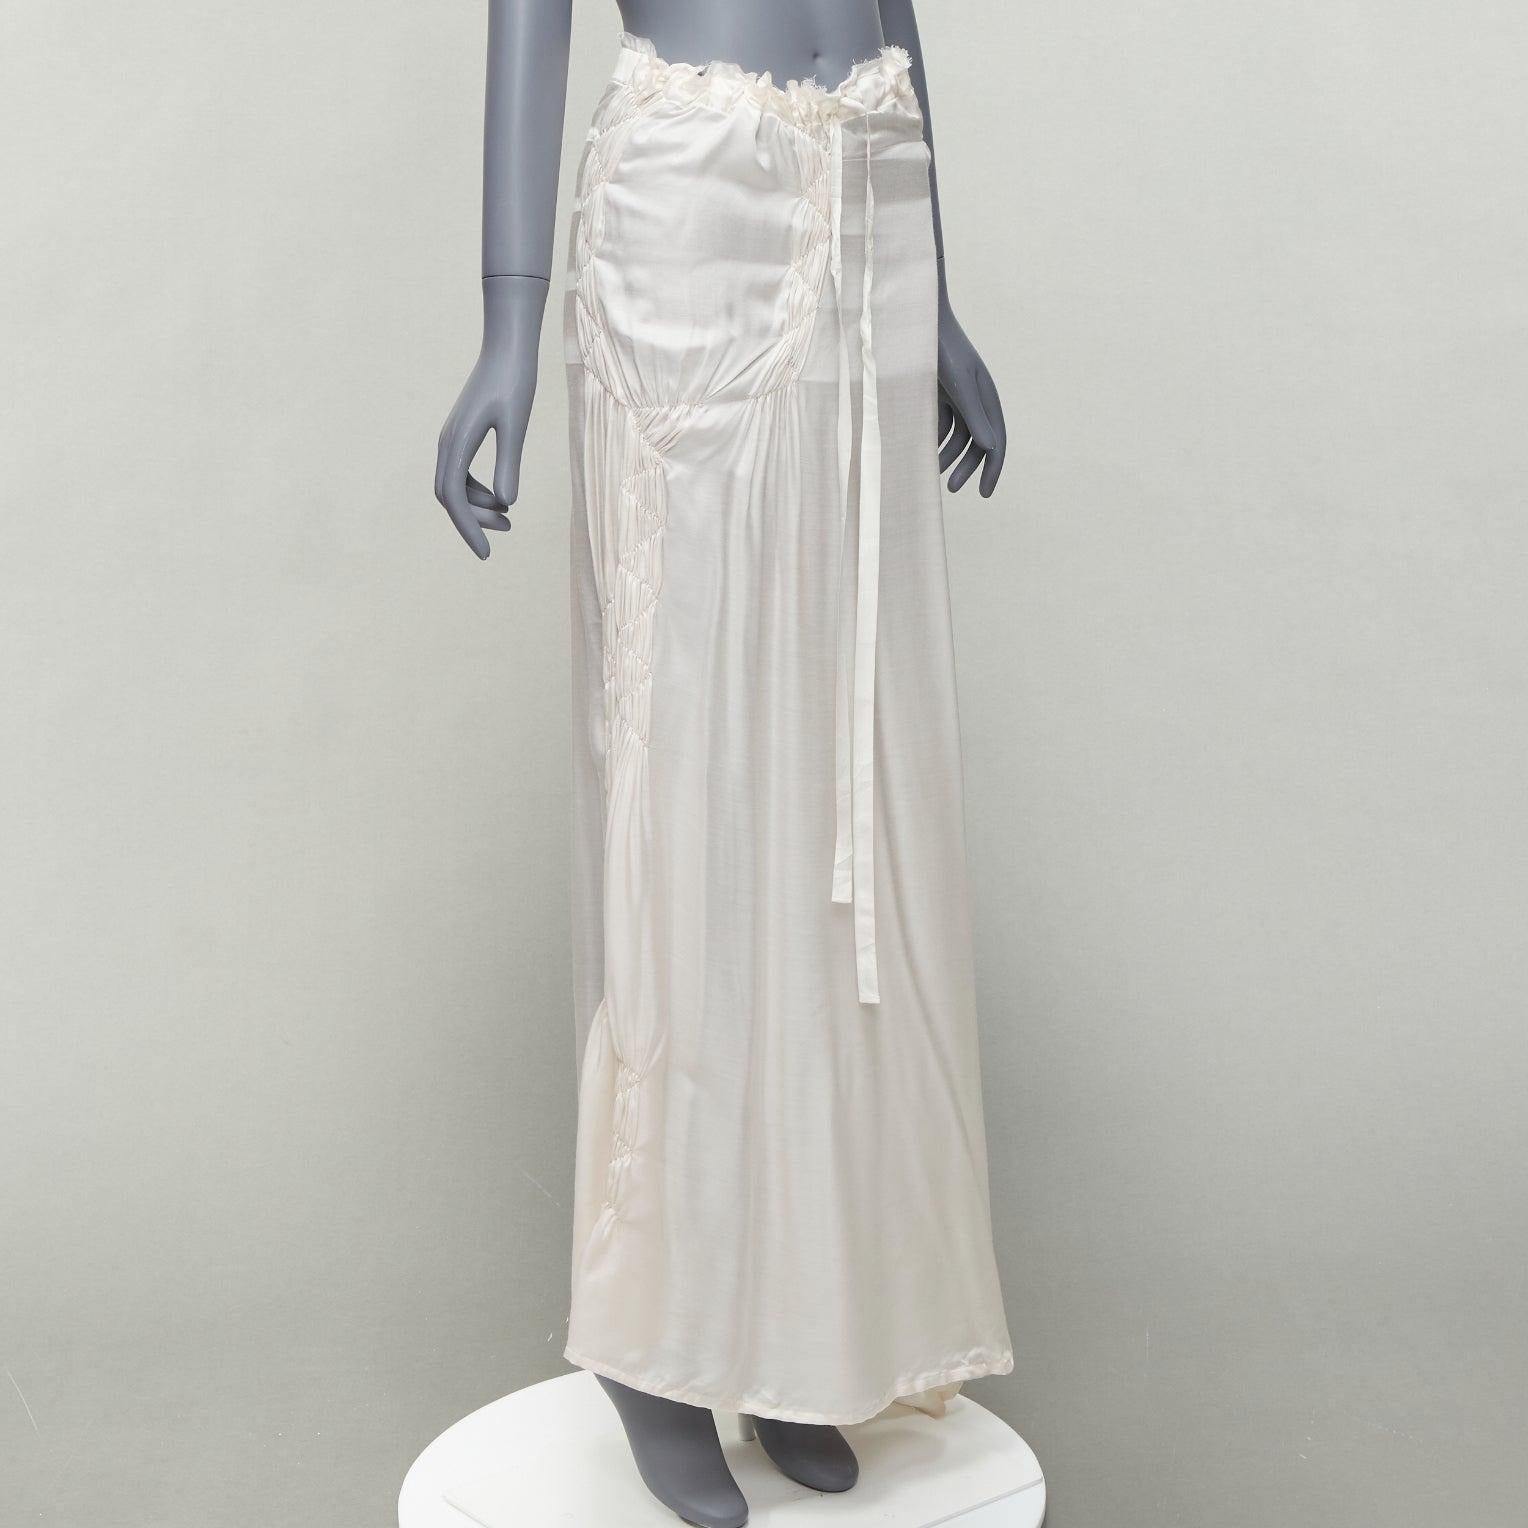 ANN DEMEULEMEESTER cream silk ribbon waist gathered drawstring skirt FR36 S
Reference: JACG/A00108
Brand: Ann Demeulemeester
Designer: Ann Demeulemeester
Material: Rayon, Silk, Blend
Color: Cream
Pattern: Solid
Closure: Drawstring
Extra Details: